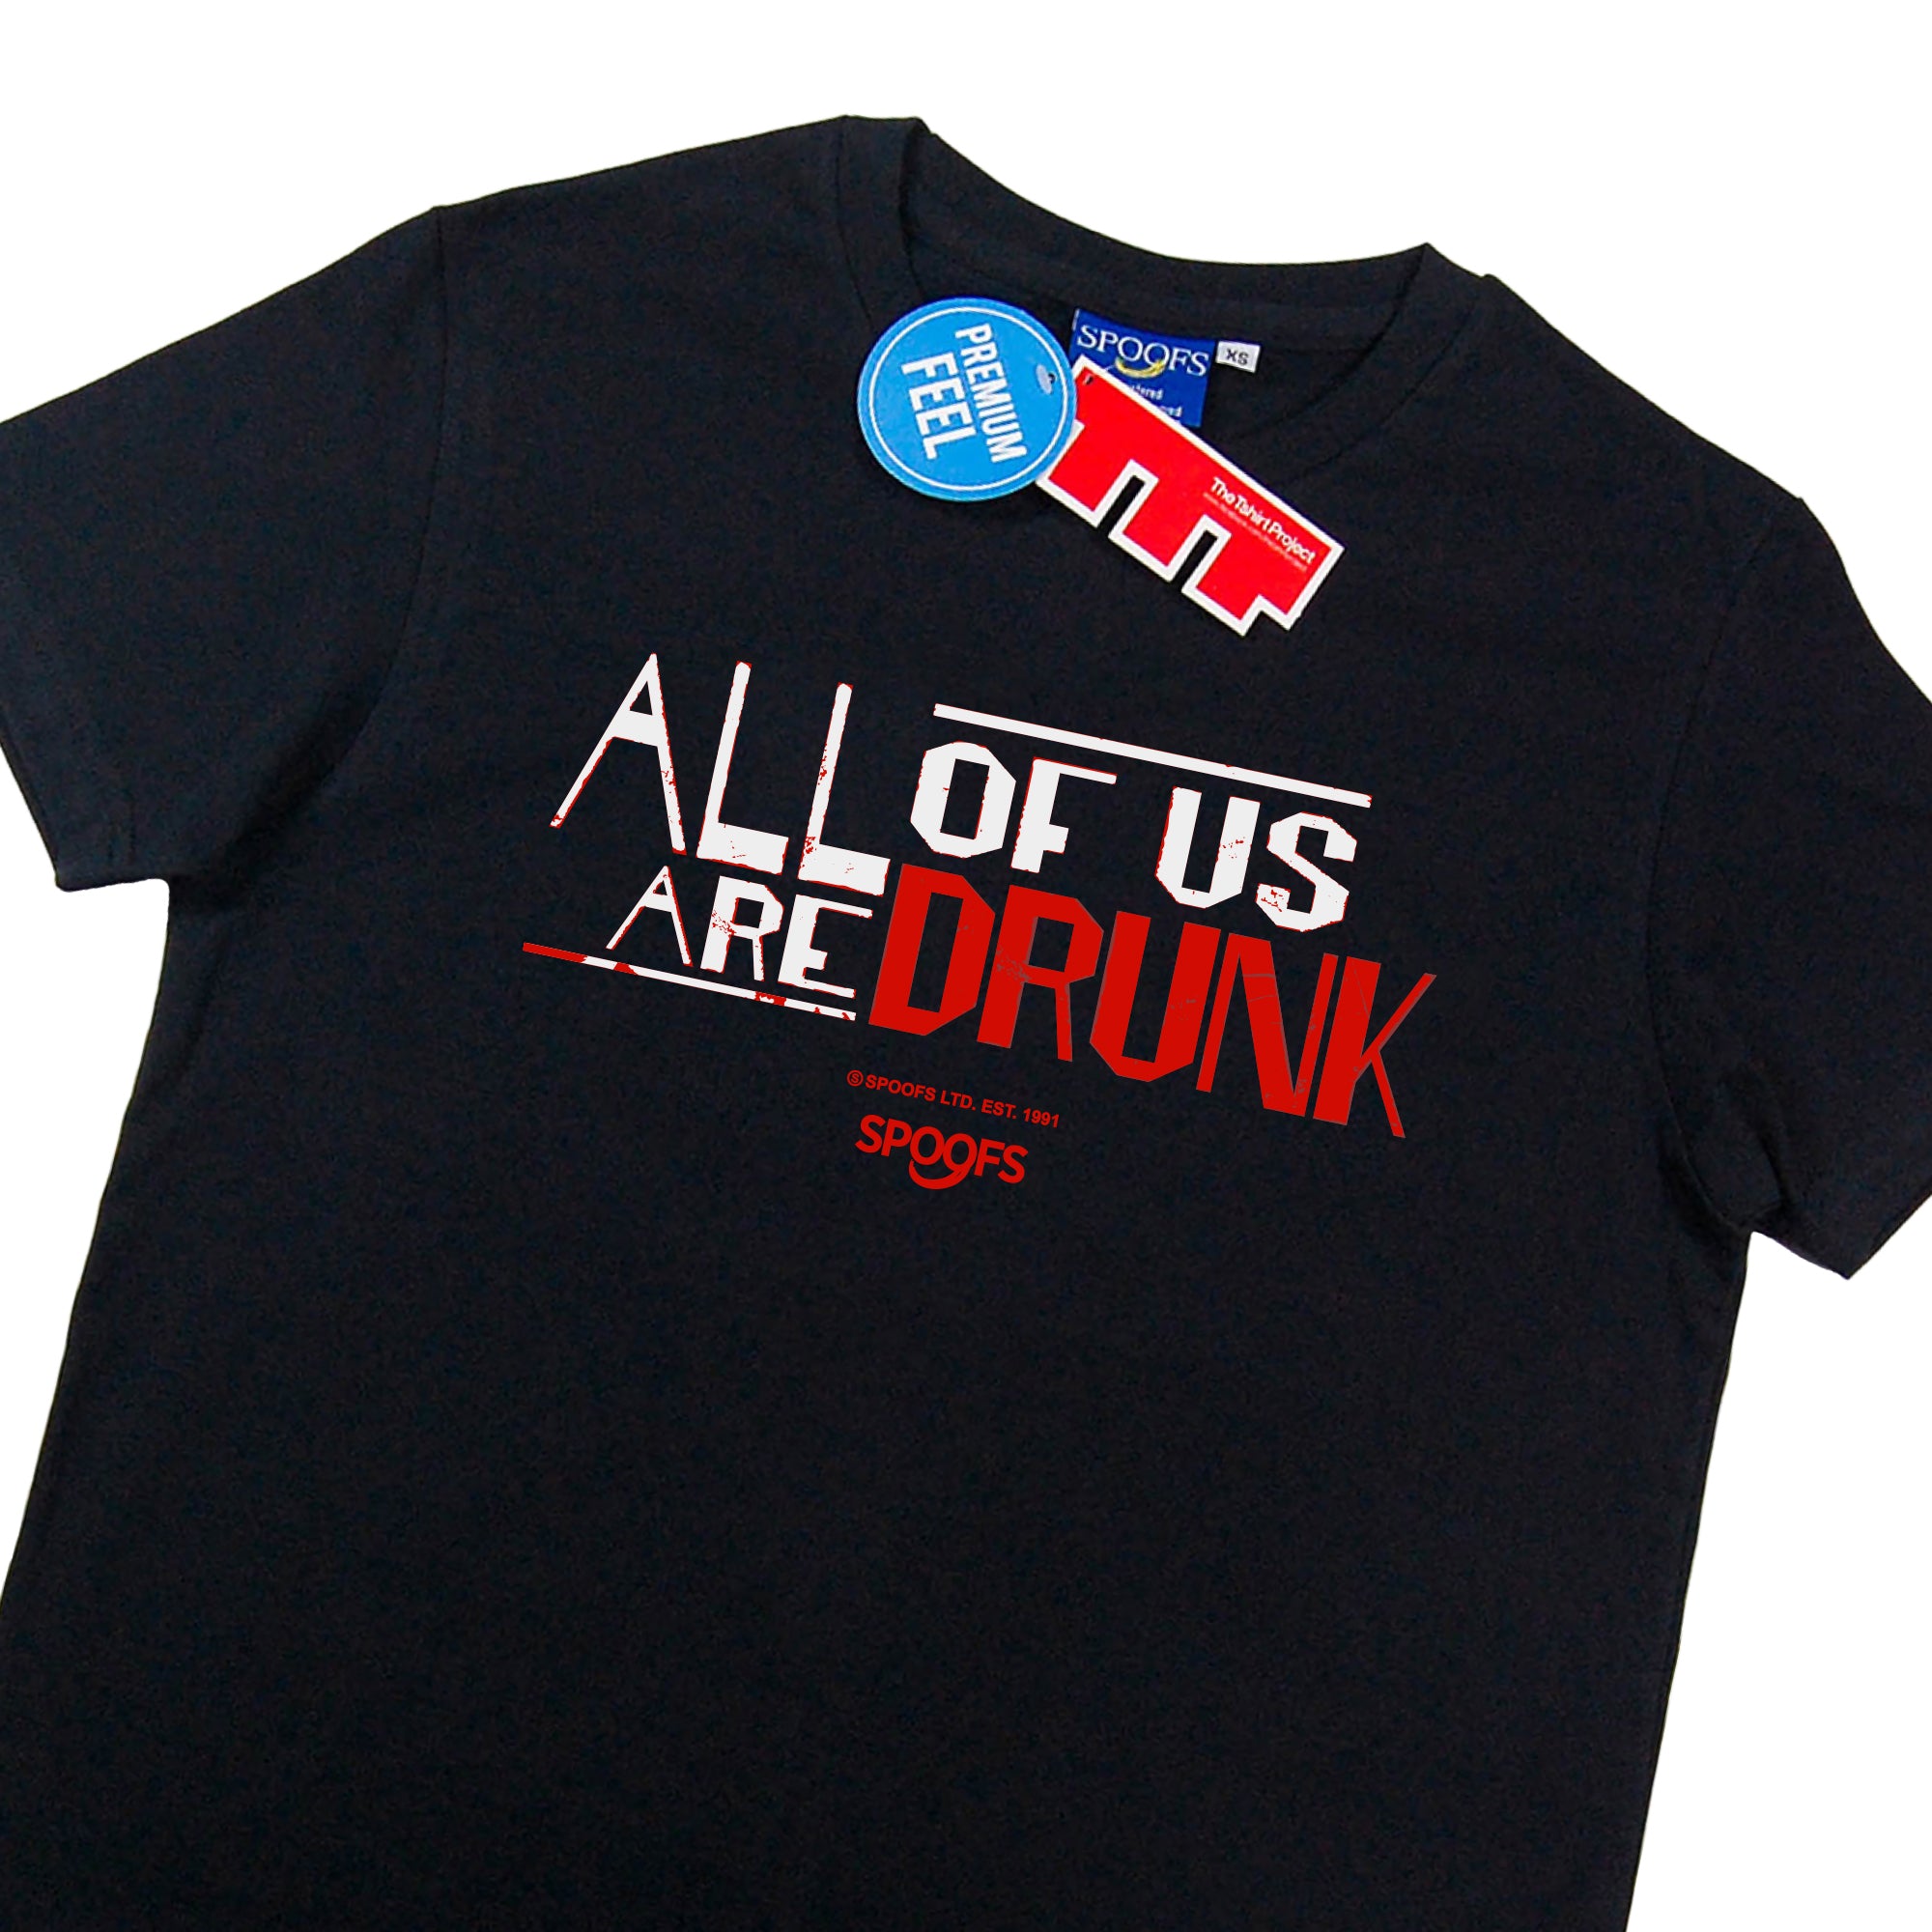 All of us are drunk (Black)